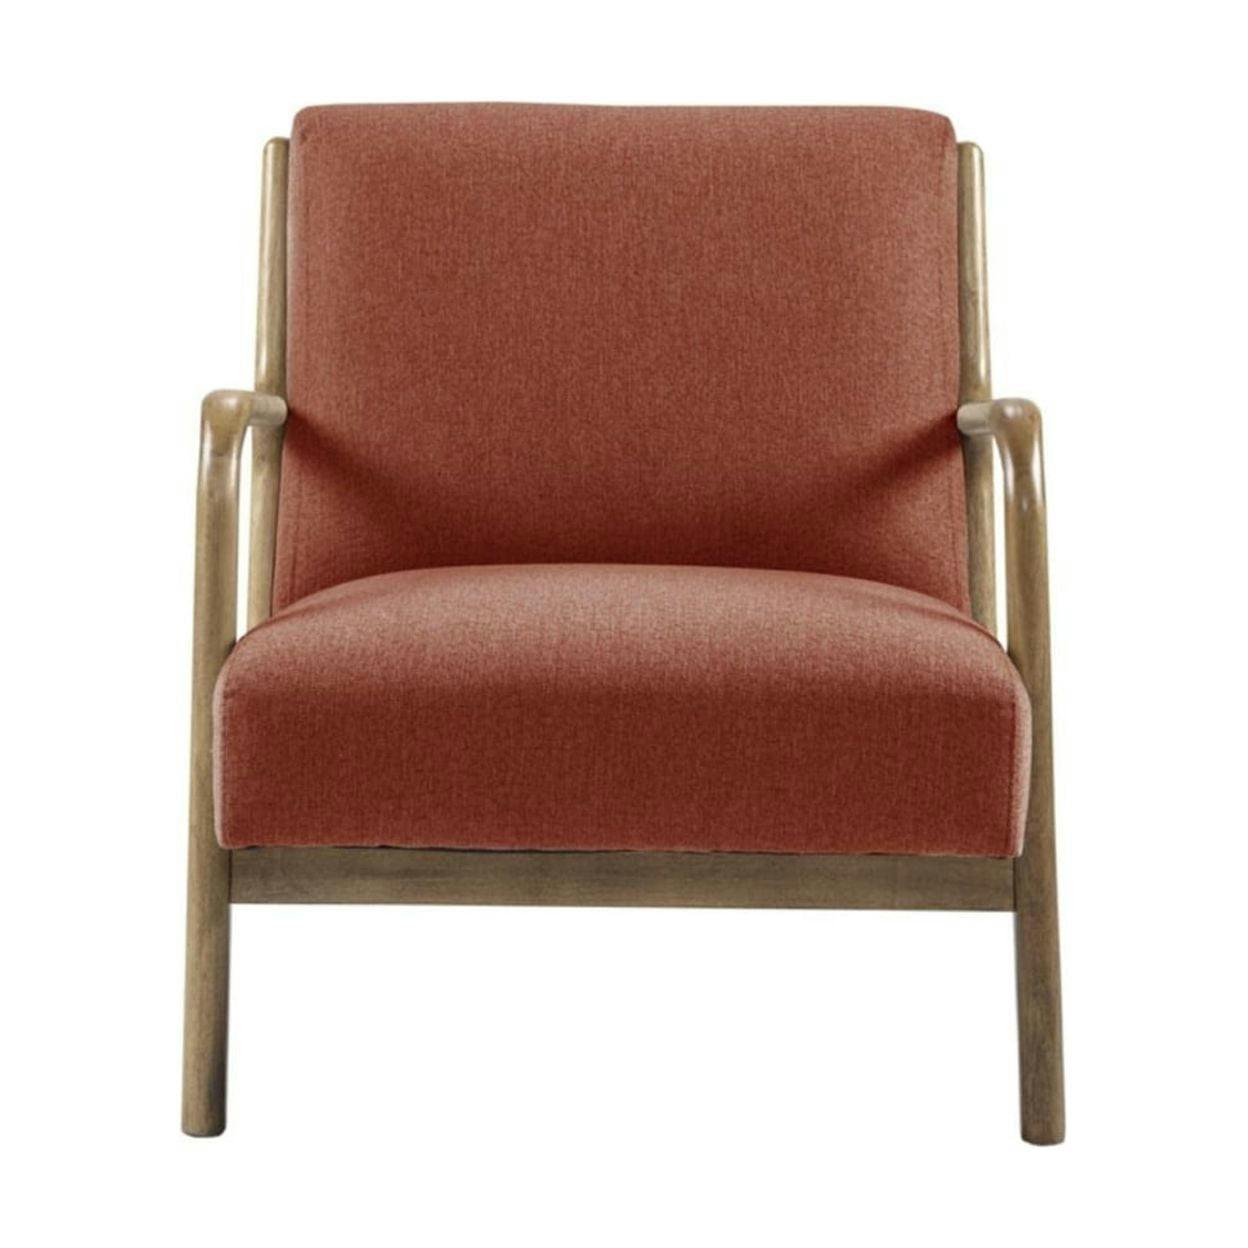 Novak Mid-Century Lounge Chair in Spice with Elm Wood Finish